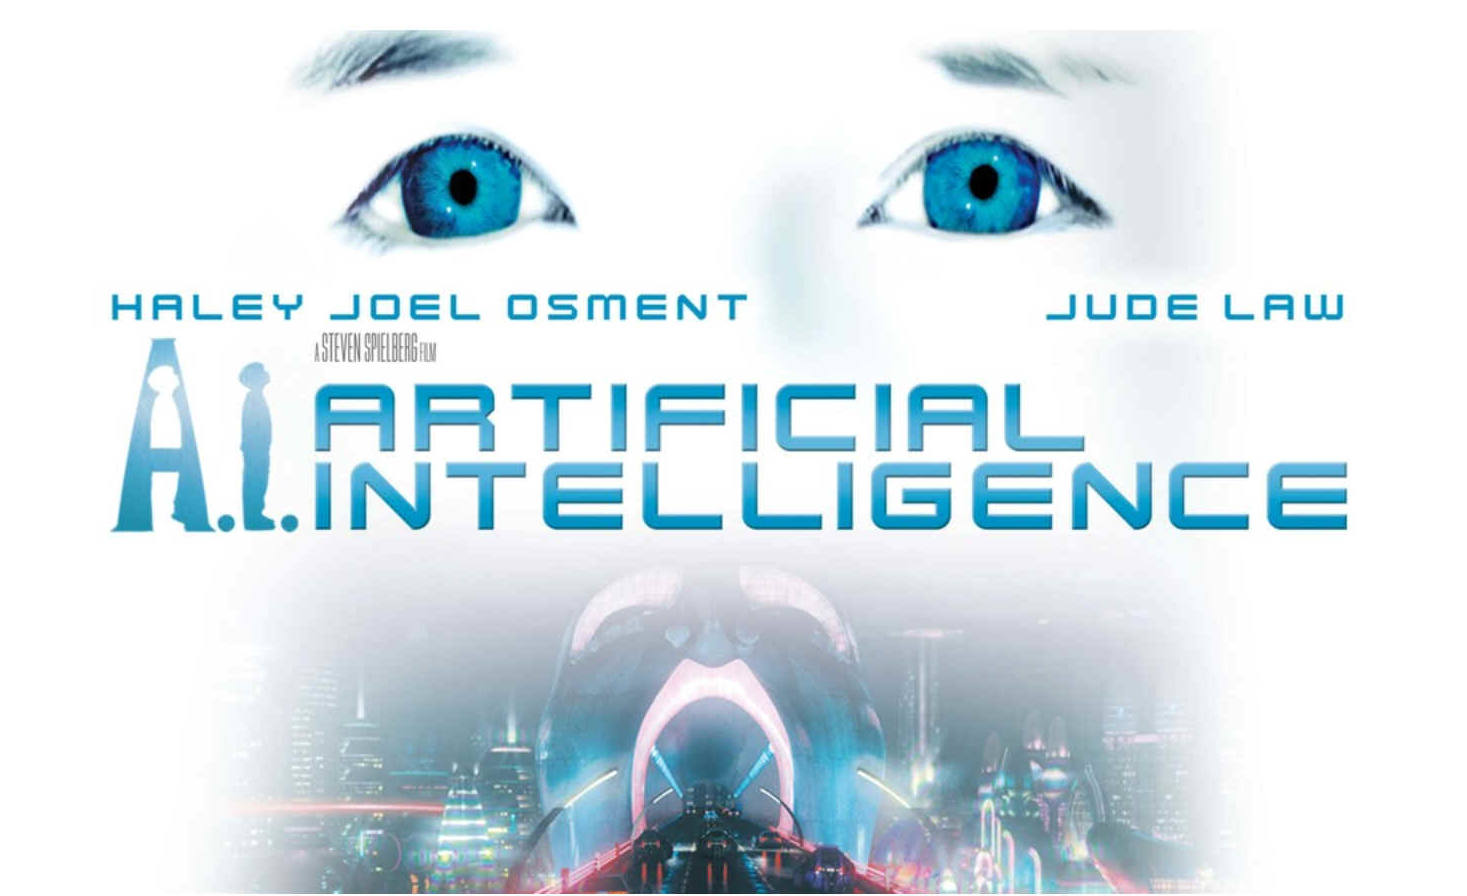 AI Artificial Intelligence, film with Haley Joel Osment and Jude Law, directed by Steven Spielberg